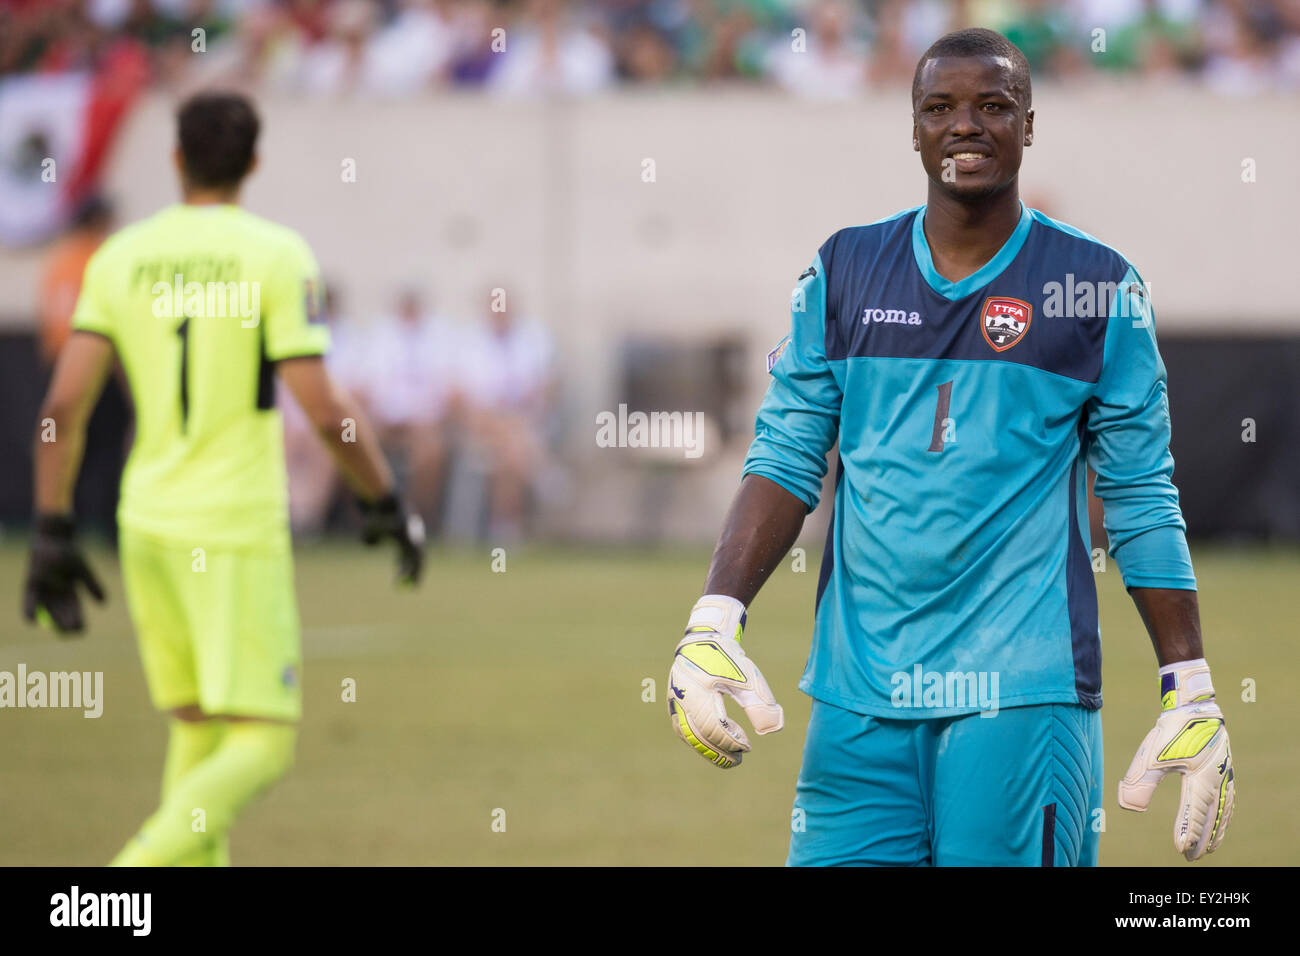 The Match By Shootout. 19th July, 2015. Trinidad & Tobago goalkeeper Marvin Phillip (1) walks to his waiting spot as Panama goalkeeper Jaime Penedo (1) heads to the goal area for the shootout during the CONCACAF Gold Cup 2015 Quarterfinal match between the Trinidad & Tobago and Panama at MetLife Stadium in East Rutherford, New Jersey. Panama won the match by shootout. (Christopher Szagola/Cal Sport Media) © csm/Alamy Live News Stock Photo